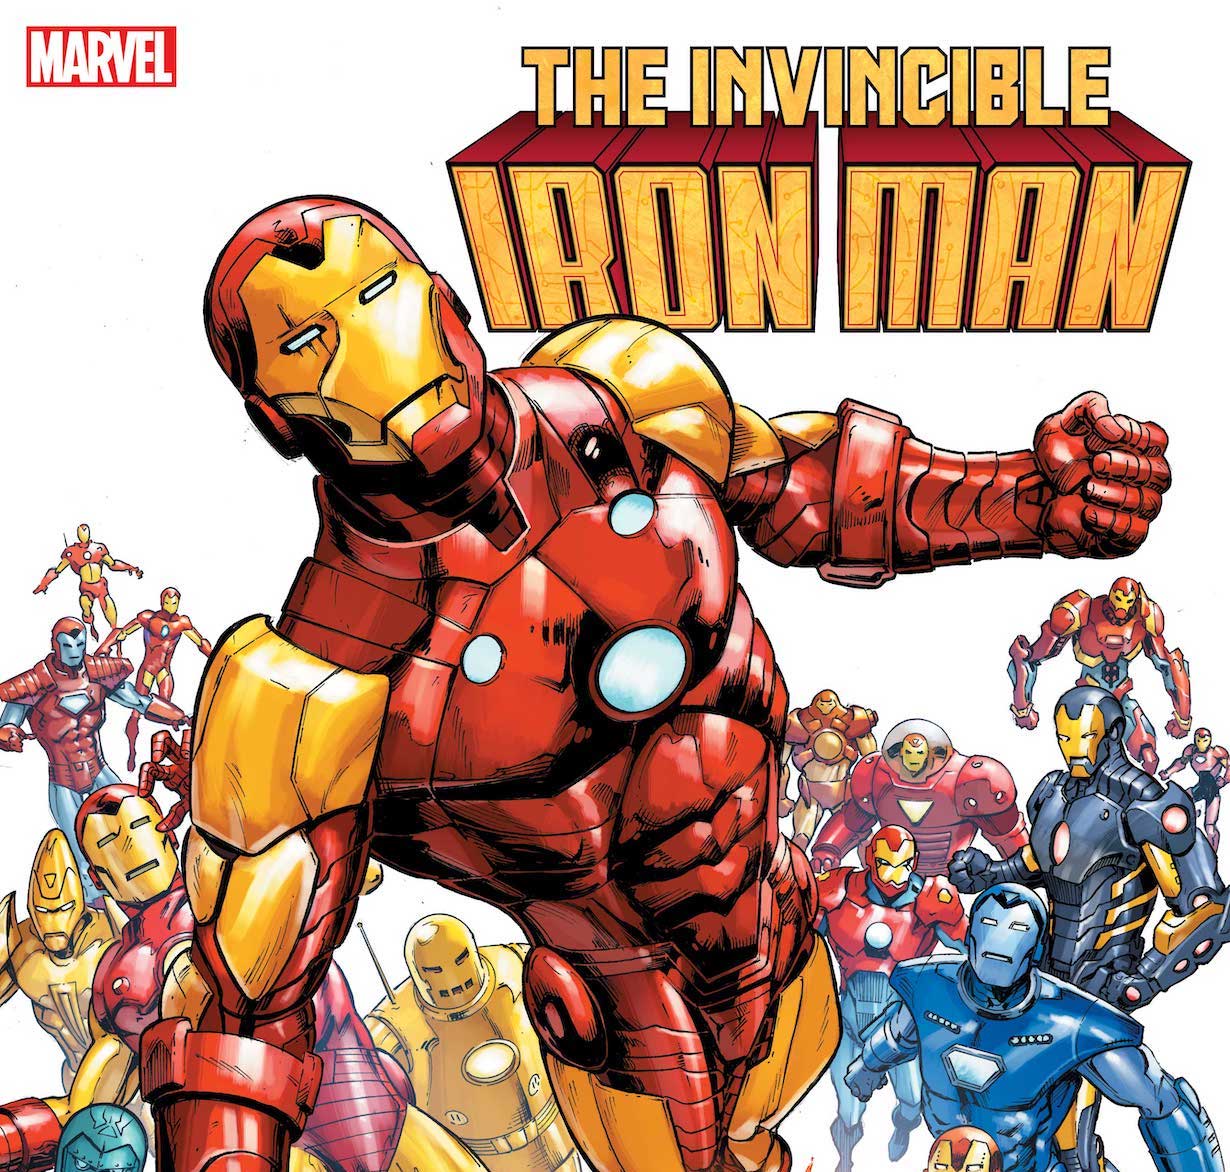 'Invincible Iron Man' #1 sells out and gets second printing